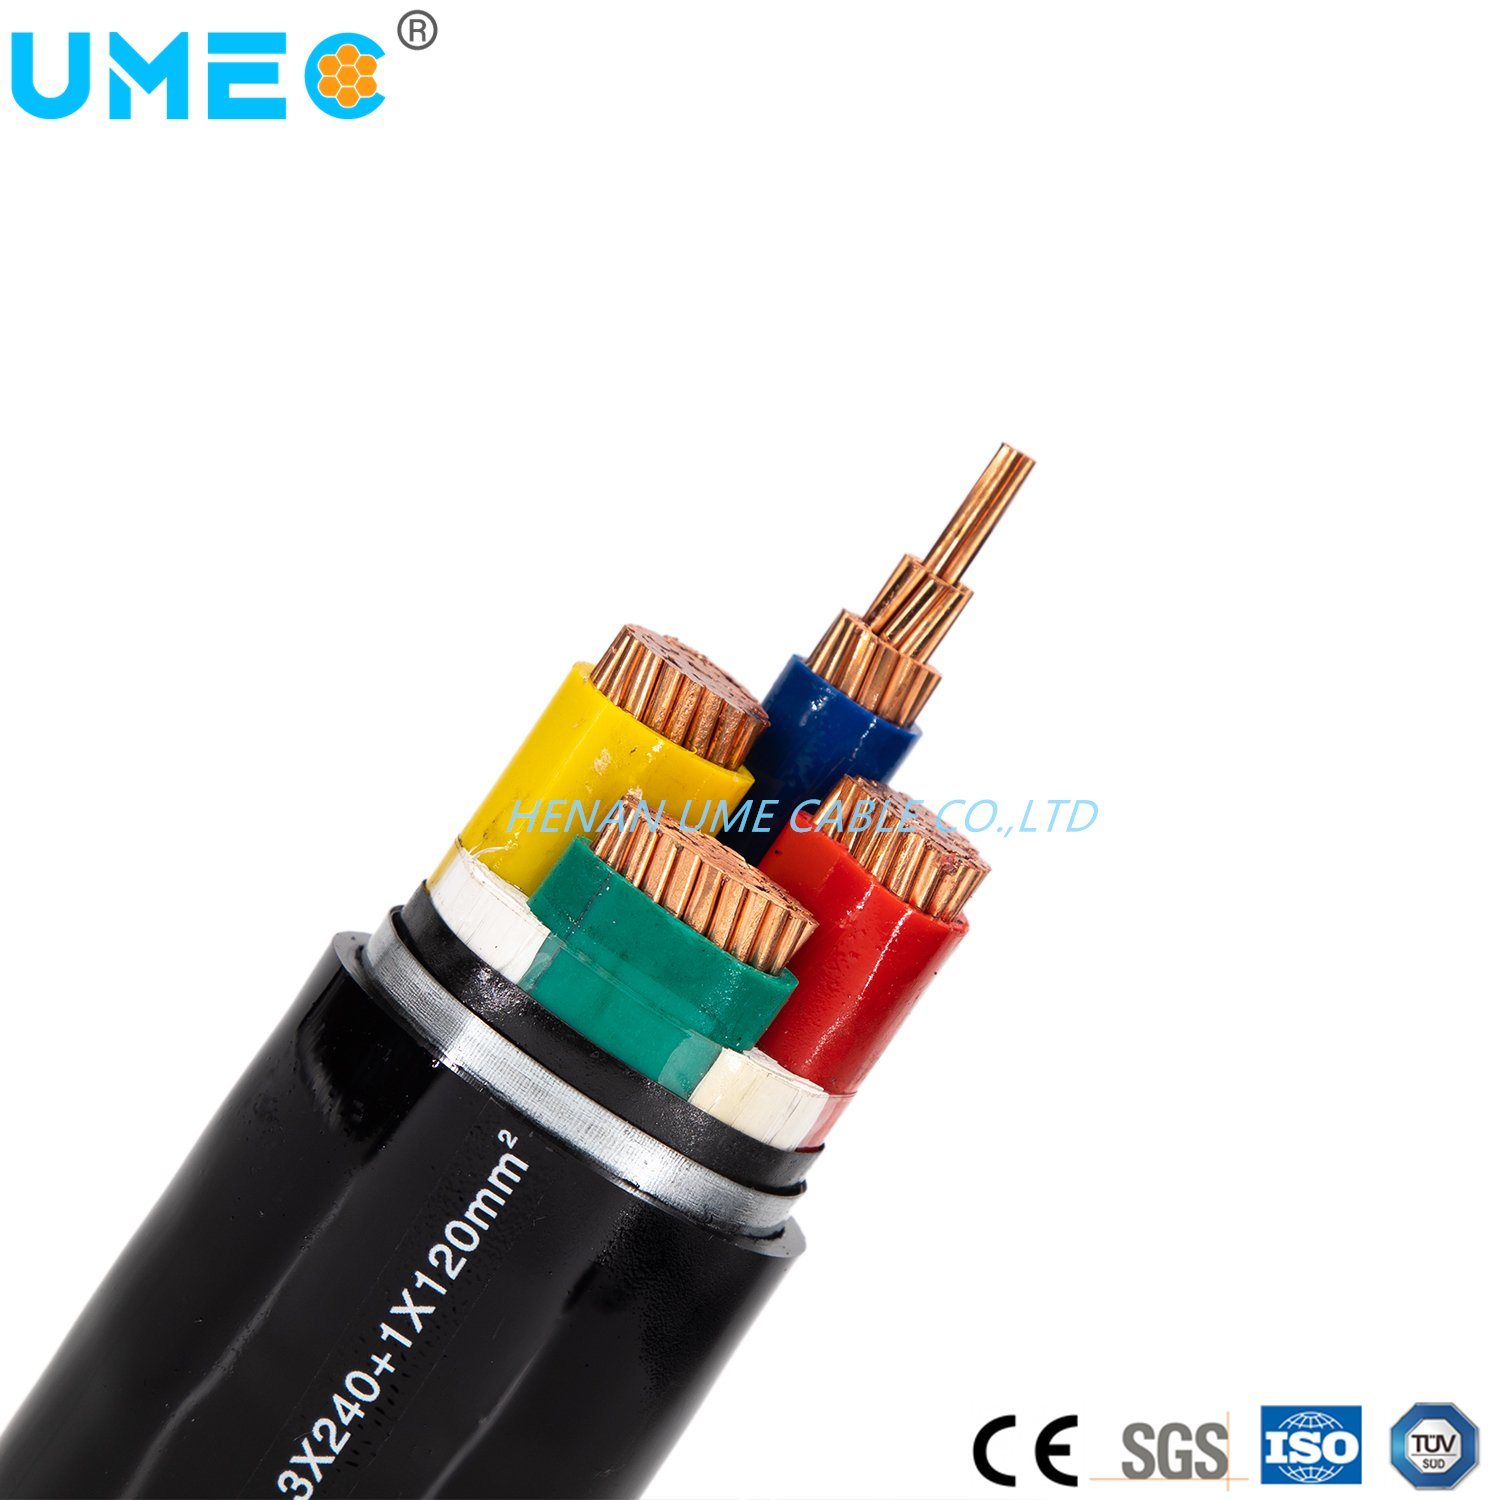 Qualified Utility Cu (Al) Conductor PVC Insulated PVC Sheathed Steel Tape Armoured Cable VV22 Vlv22